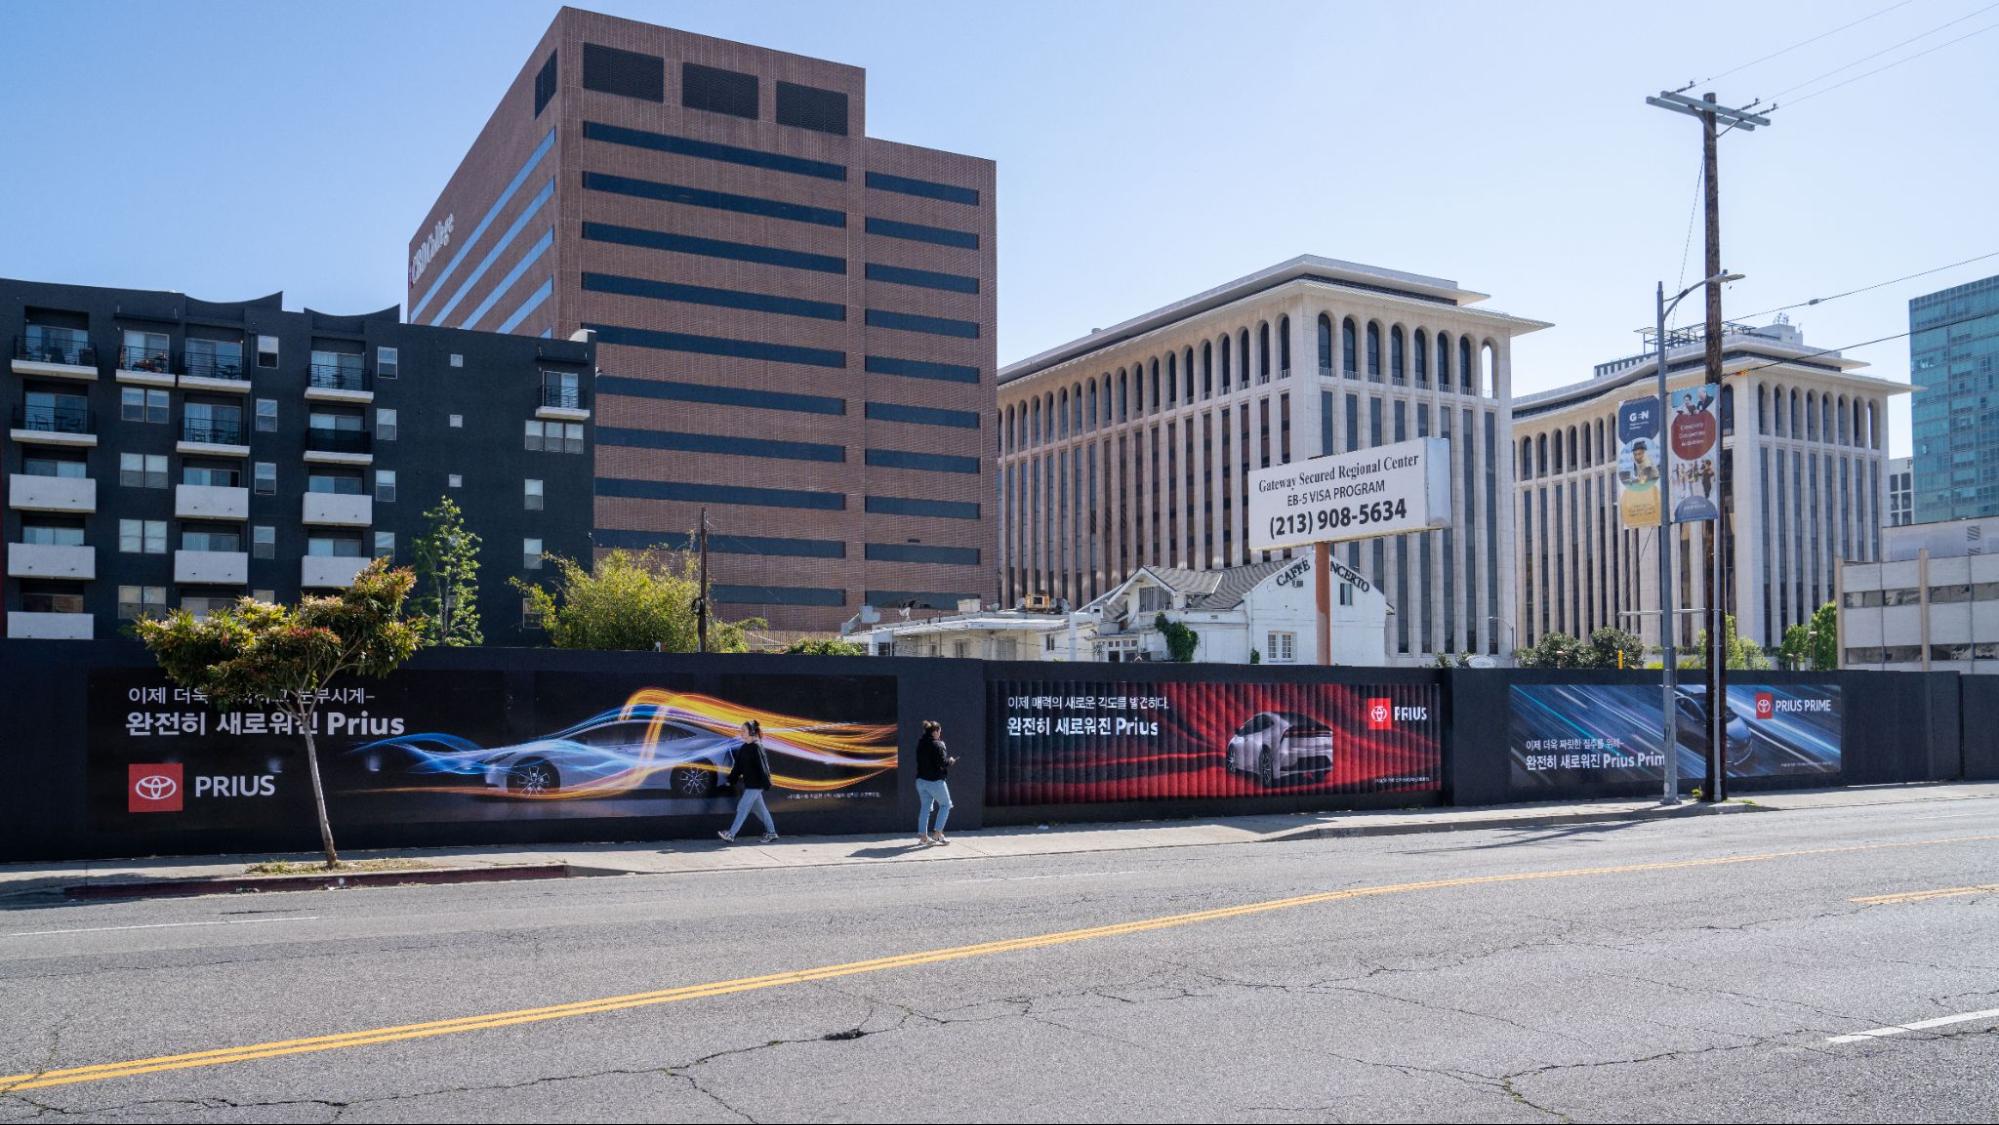 Toyota Prius Lenticular Full Street Barricade Dominate LA Koreatown Out-of-Home Advertising